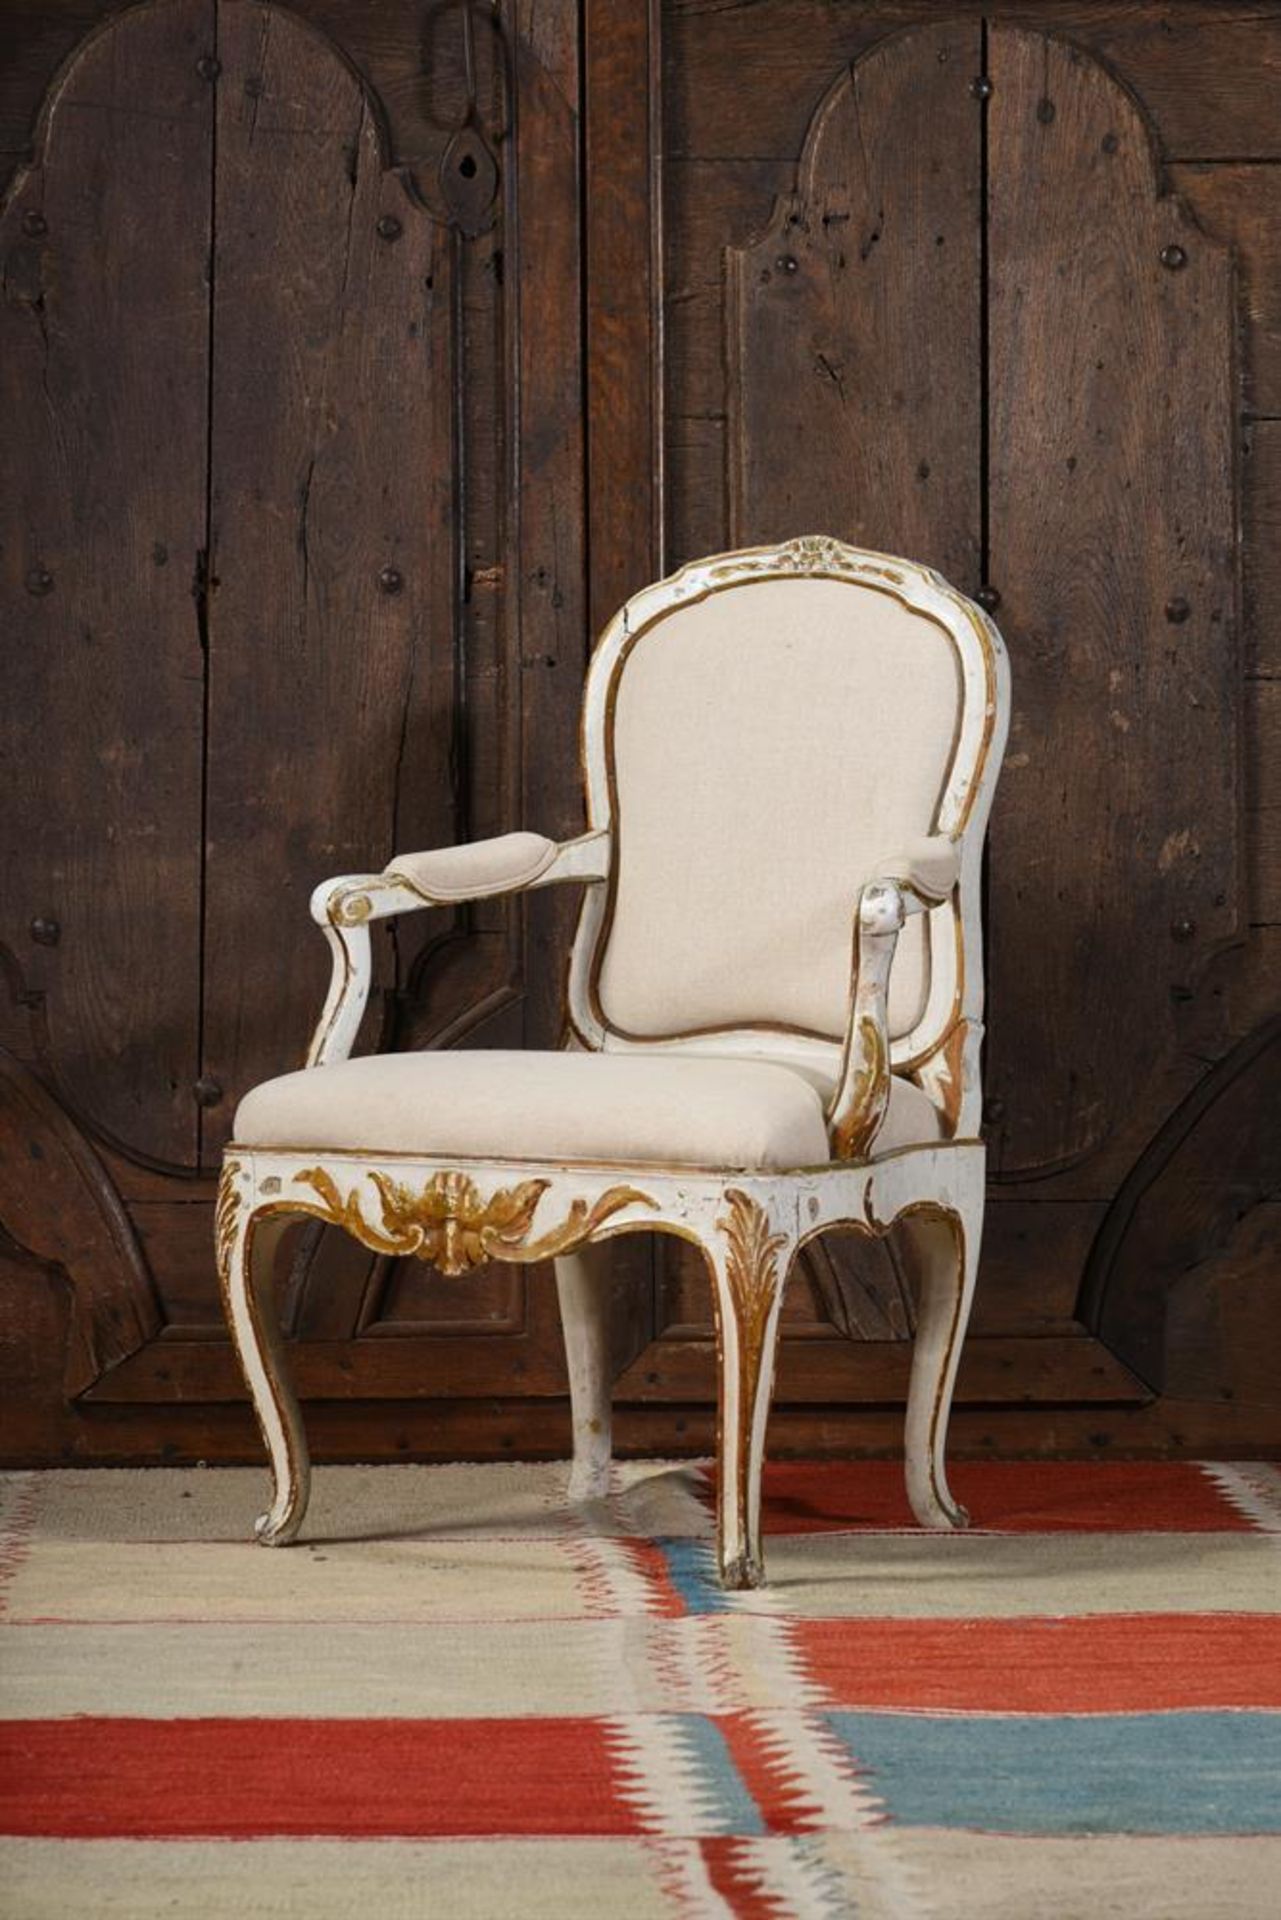 AN ITALIAN CREAM PAINTED AND PARCEL GILT FAUTEUIL, LATE 18TH/EARLY 19TH CENTURY